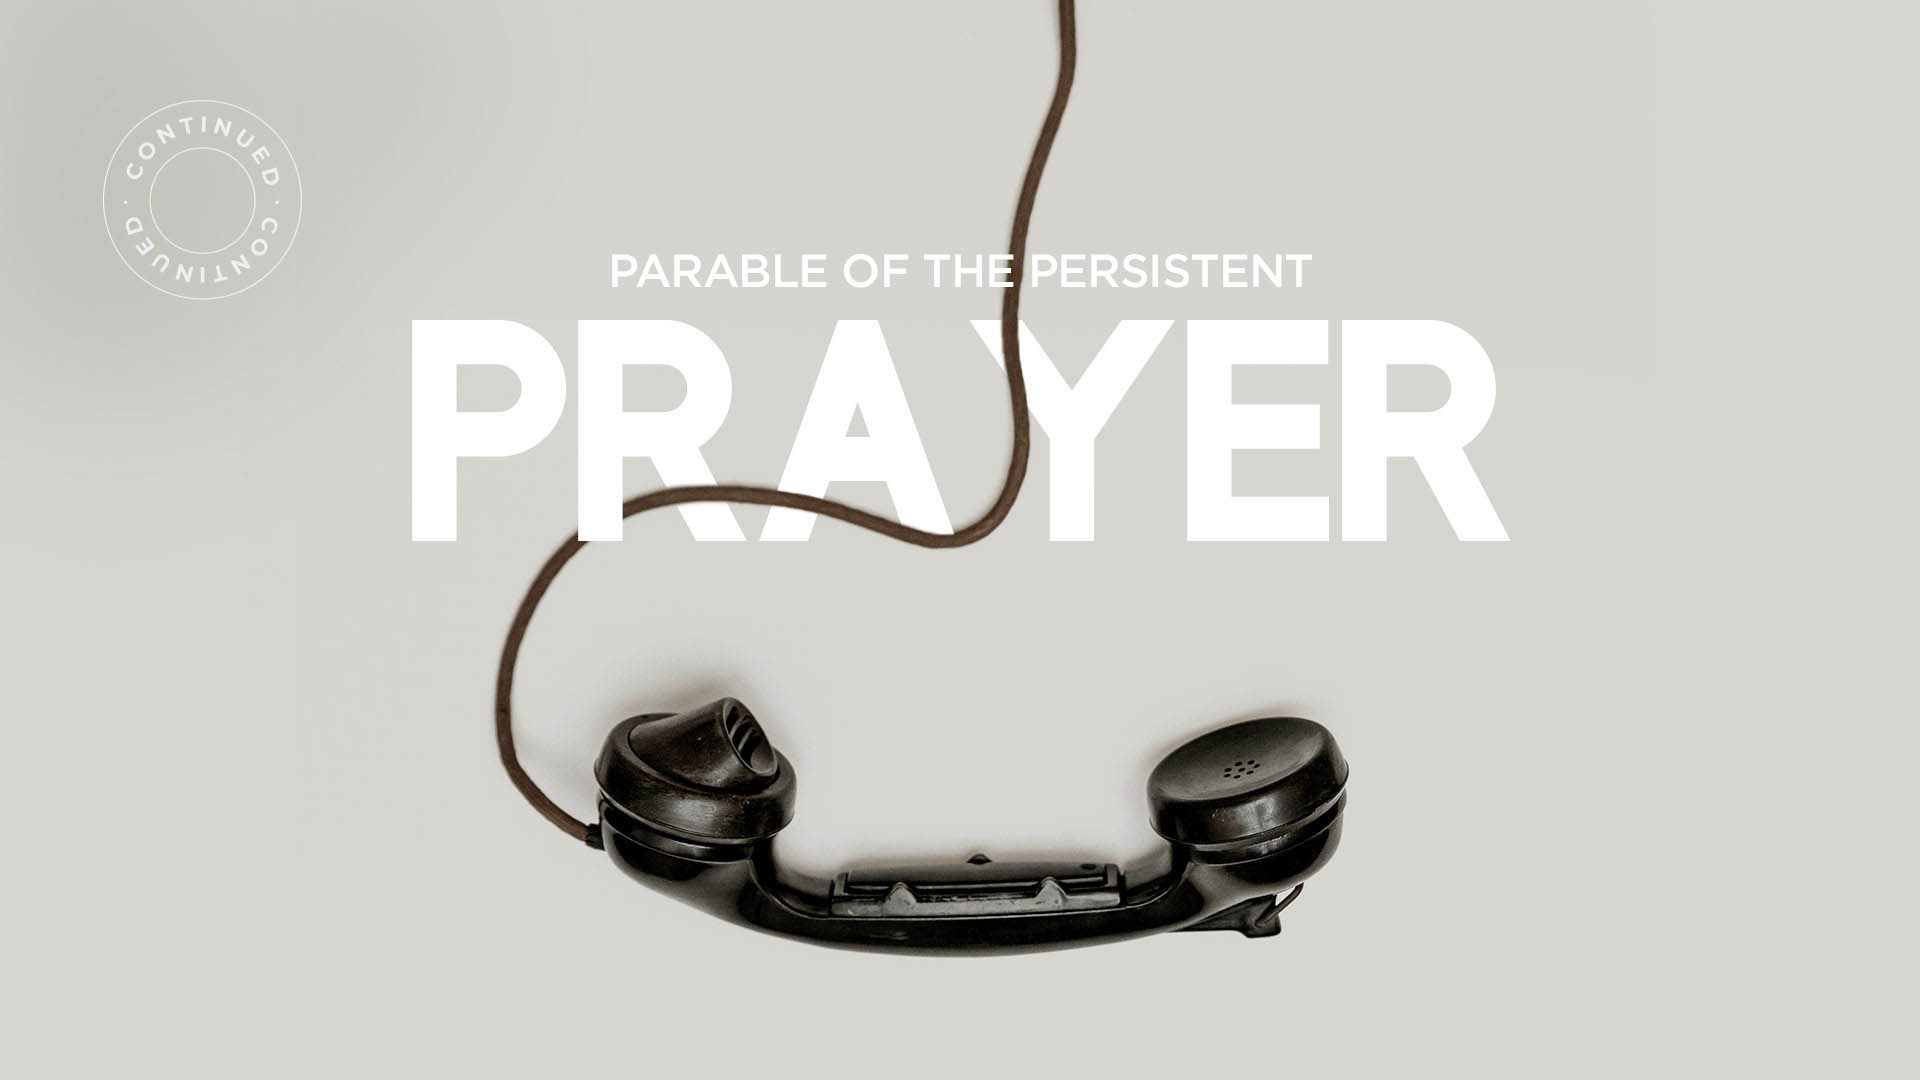 Parable Of Persistent Prayer – Continued